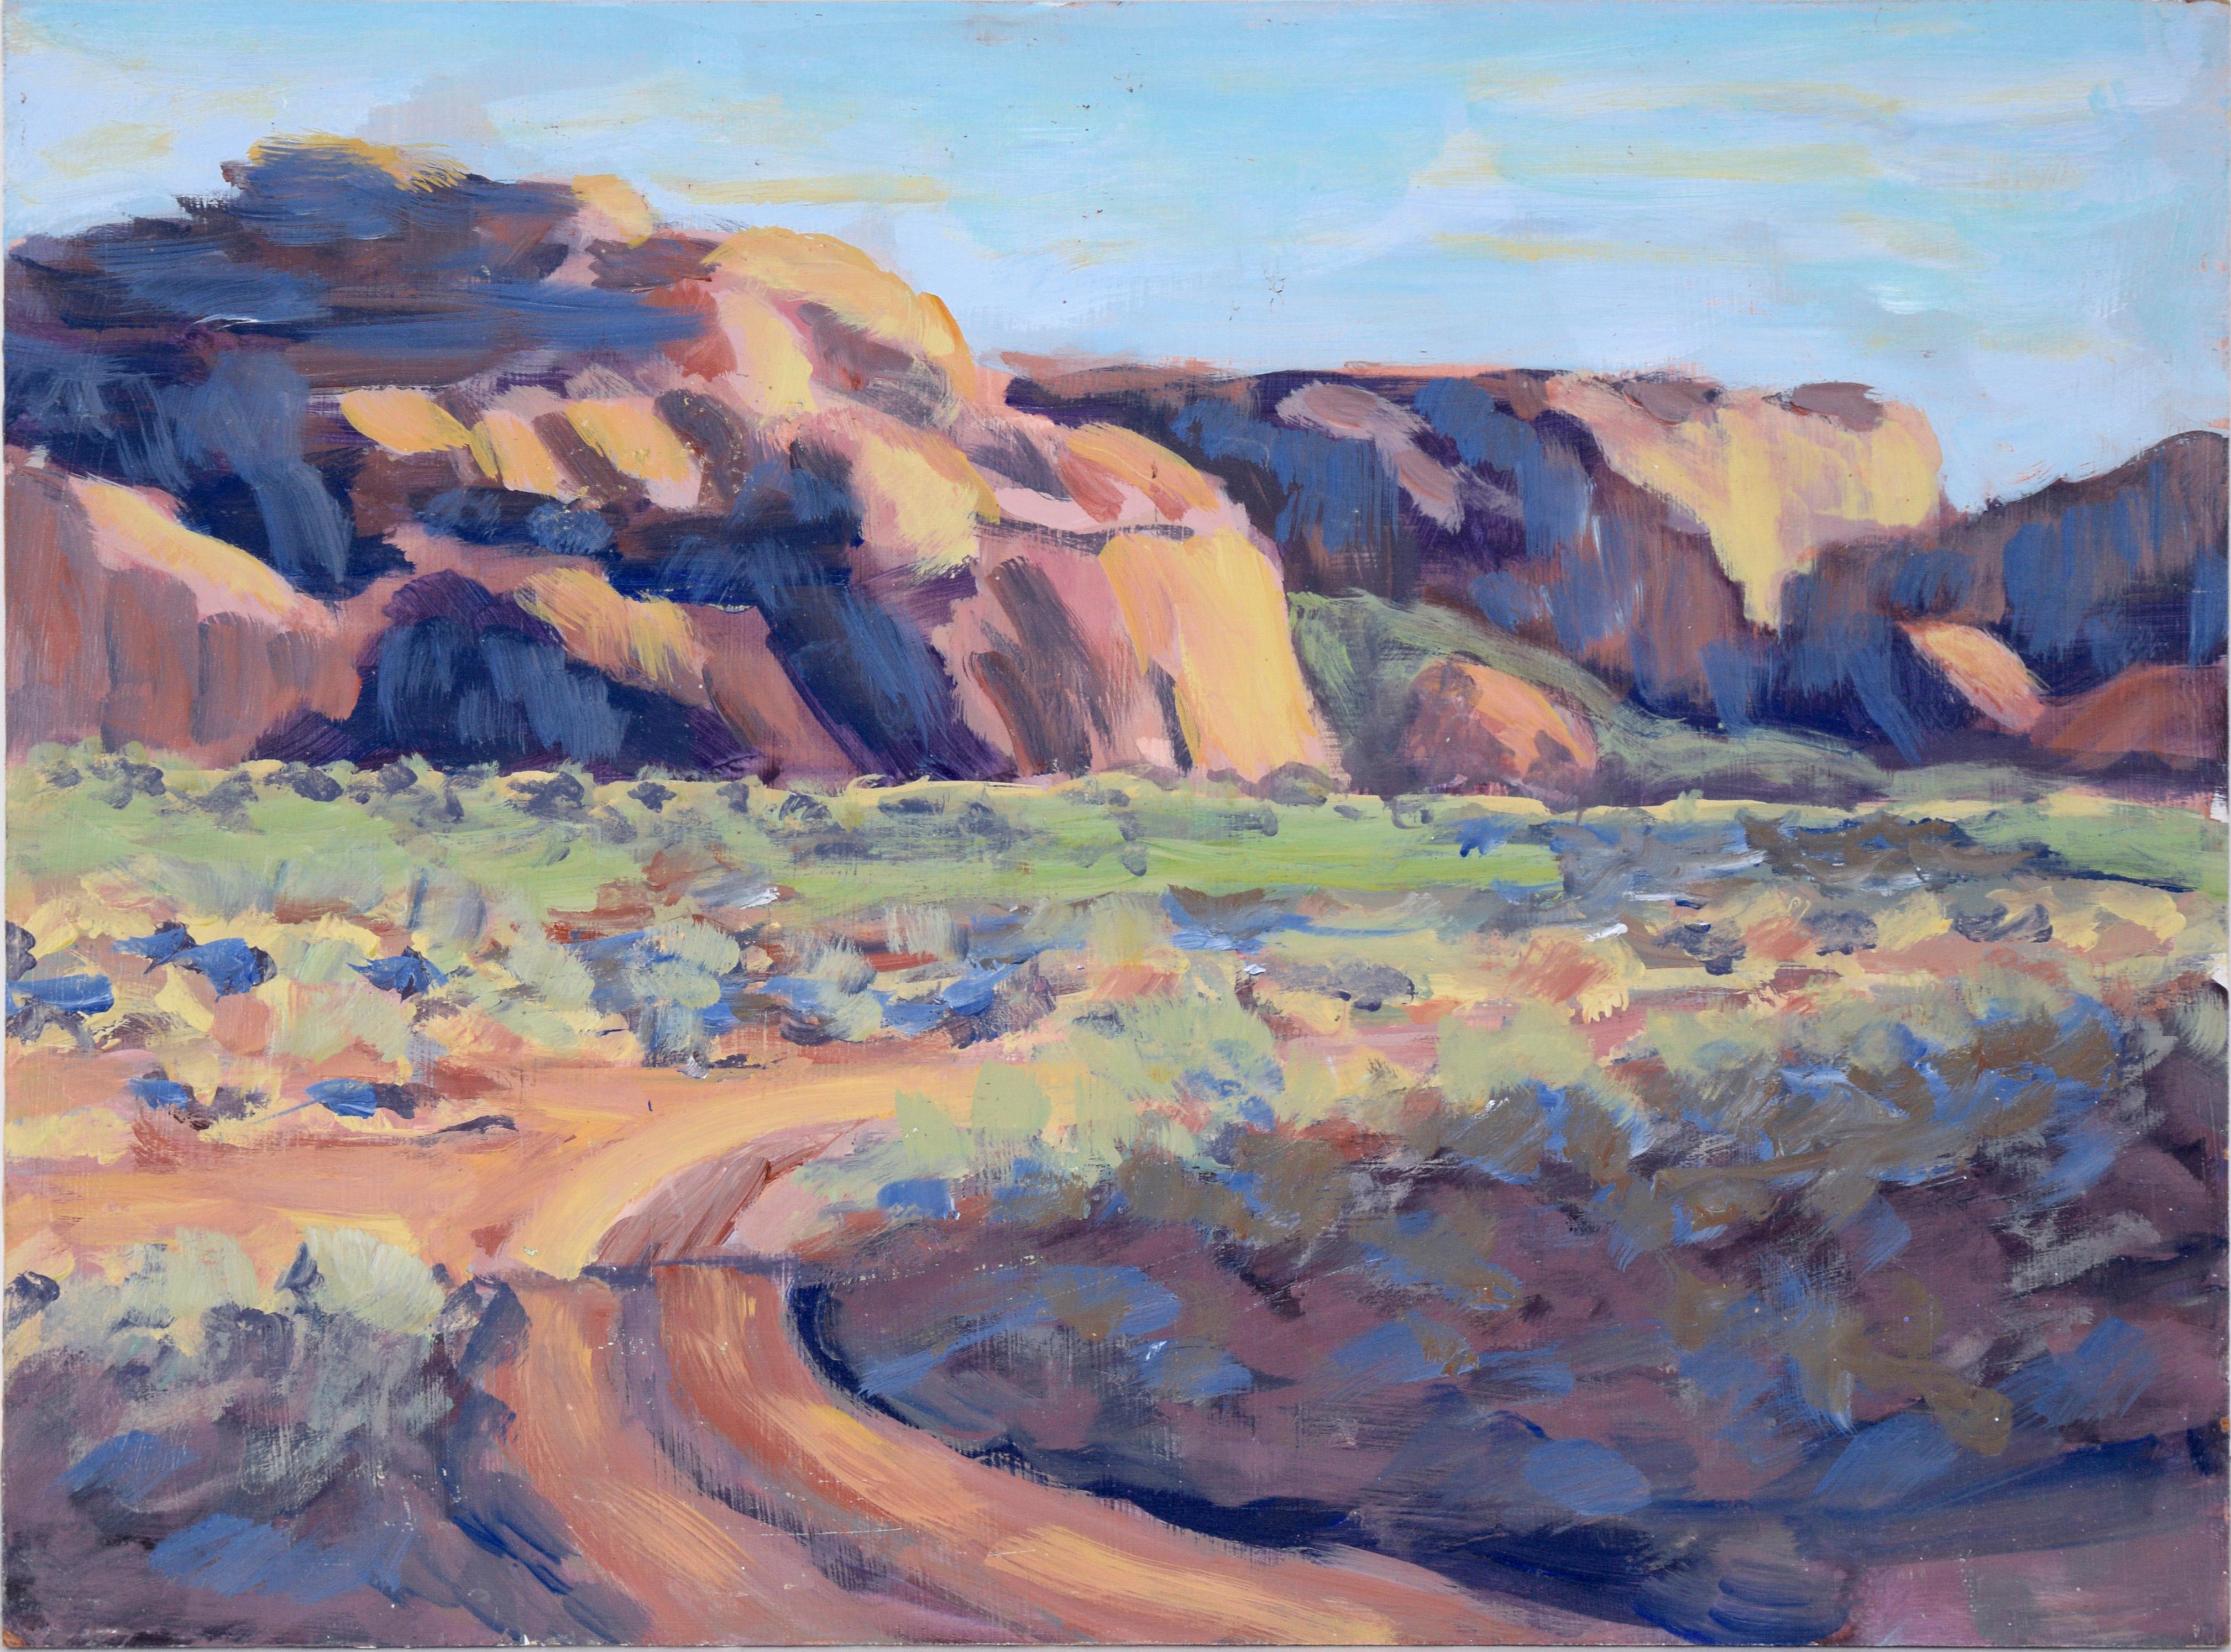 "Touring Monument Valley" - Desert Plein Aire Landscape in Acrylic on Masonite